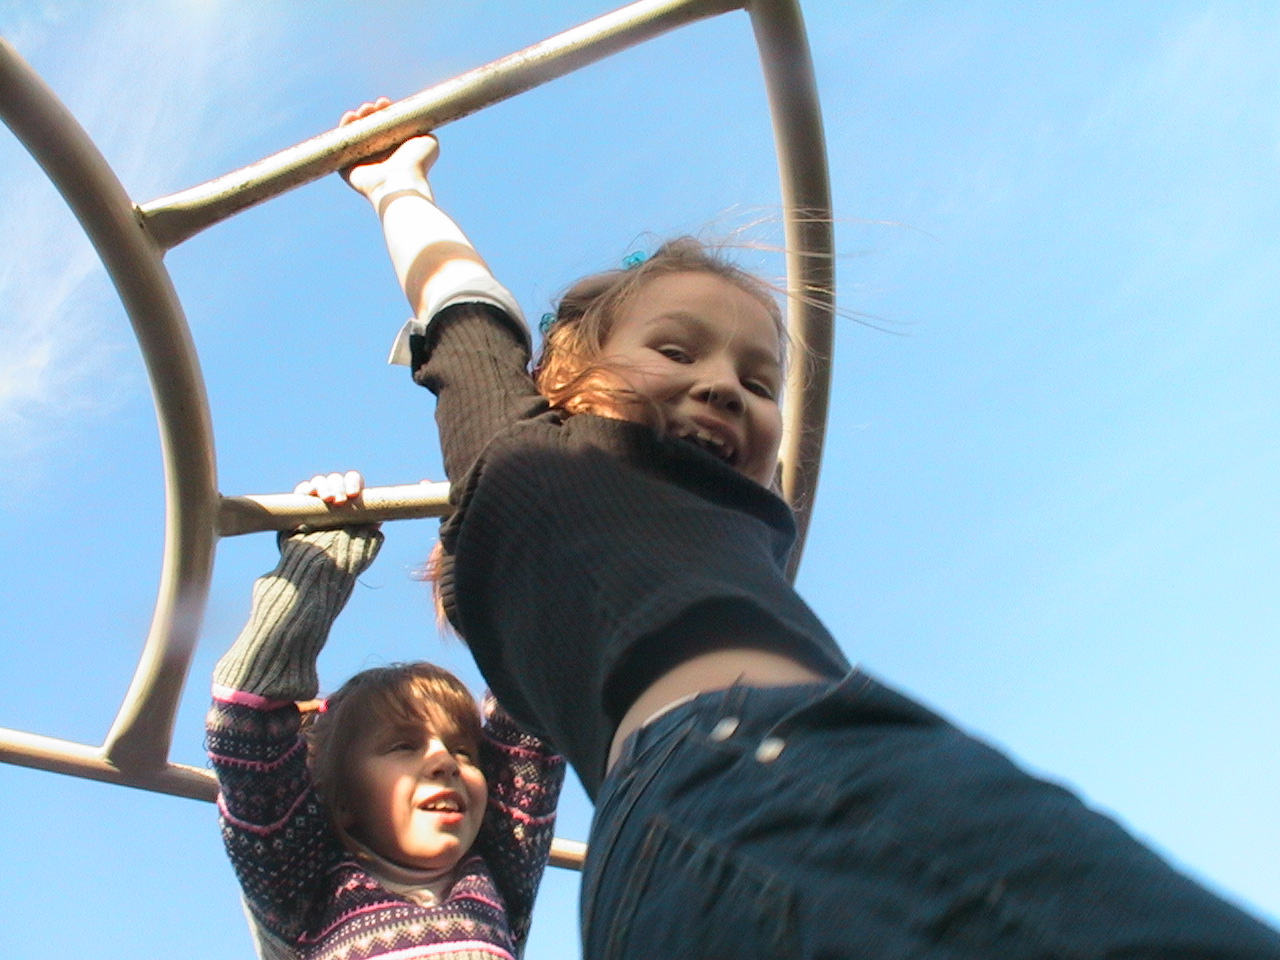 The cognitive benefits of play: Effects on the learning brain